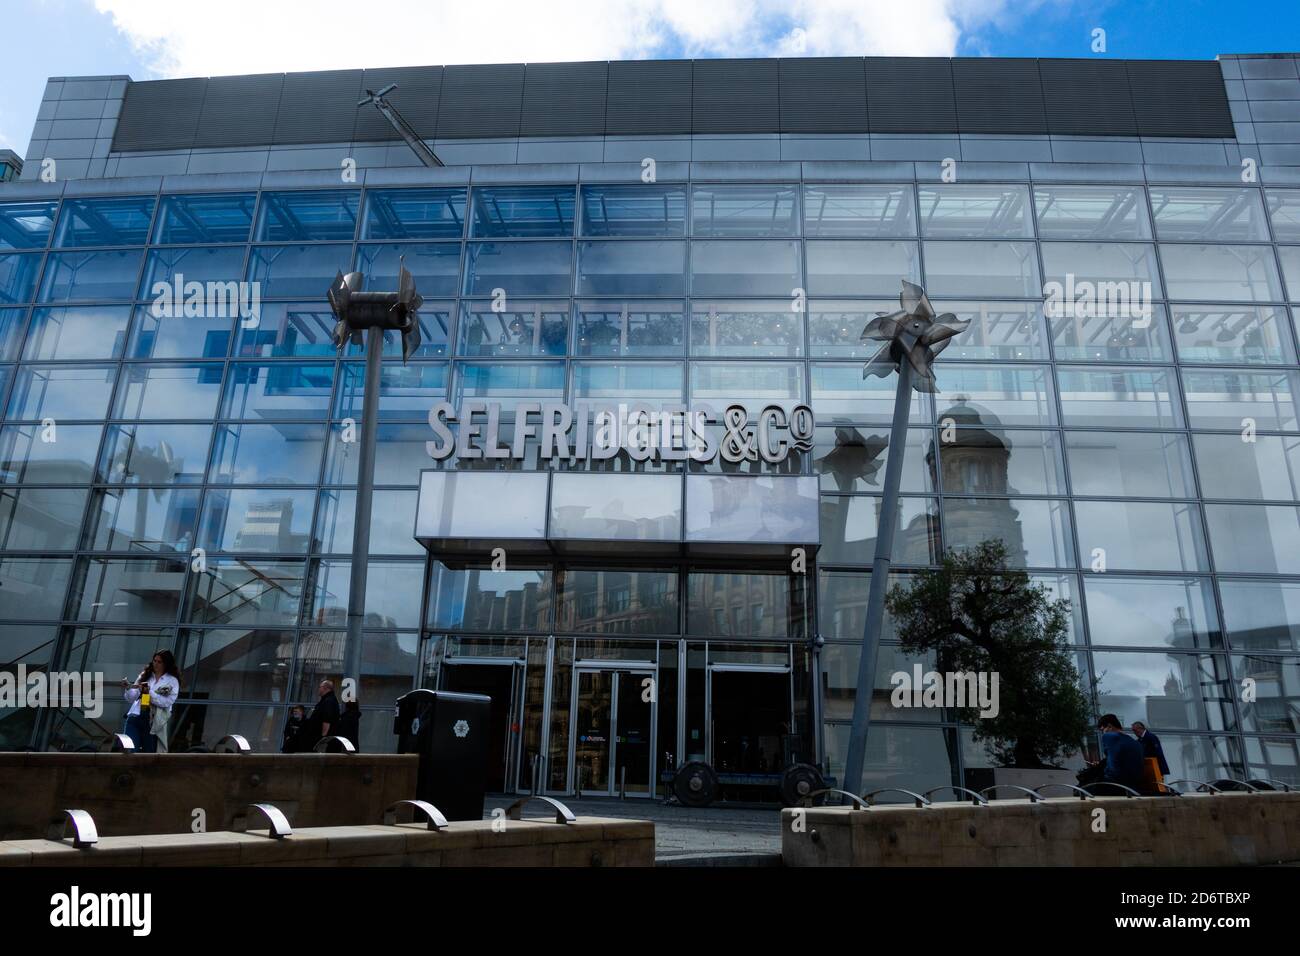 Selfridges department store, located in  Exchange Square, Manchester. Stock Photo